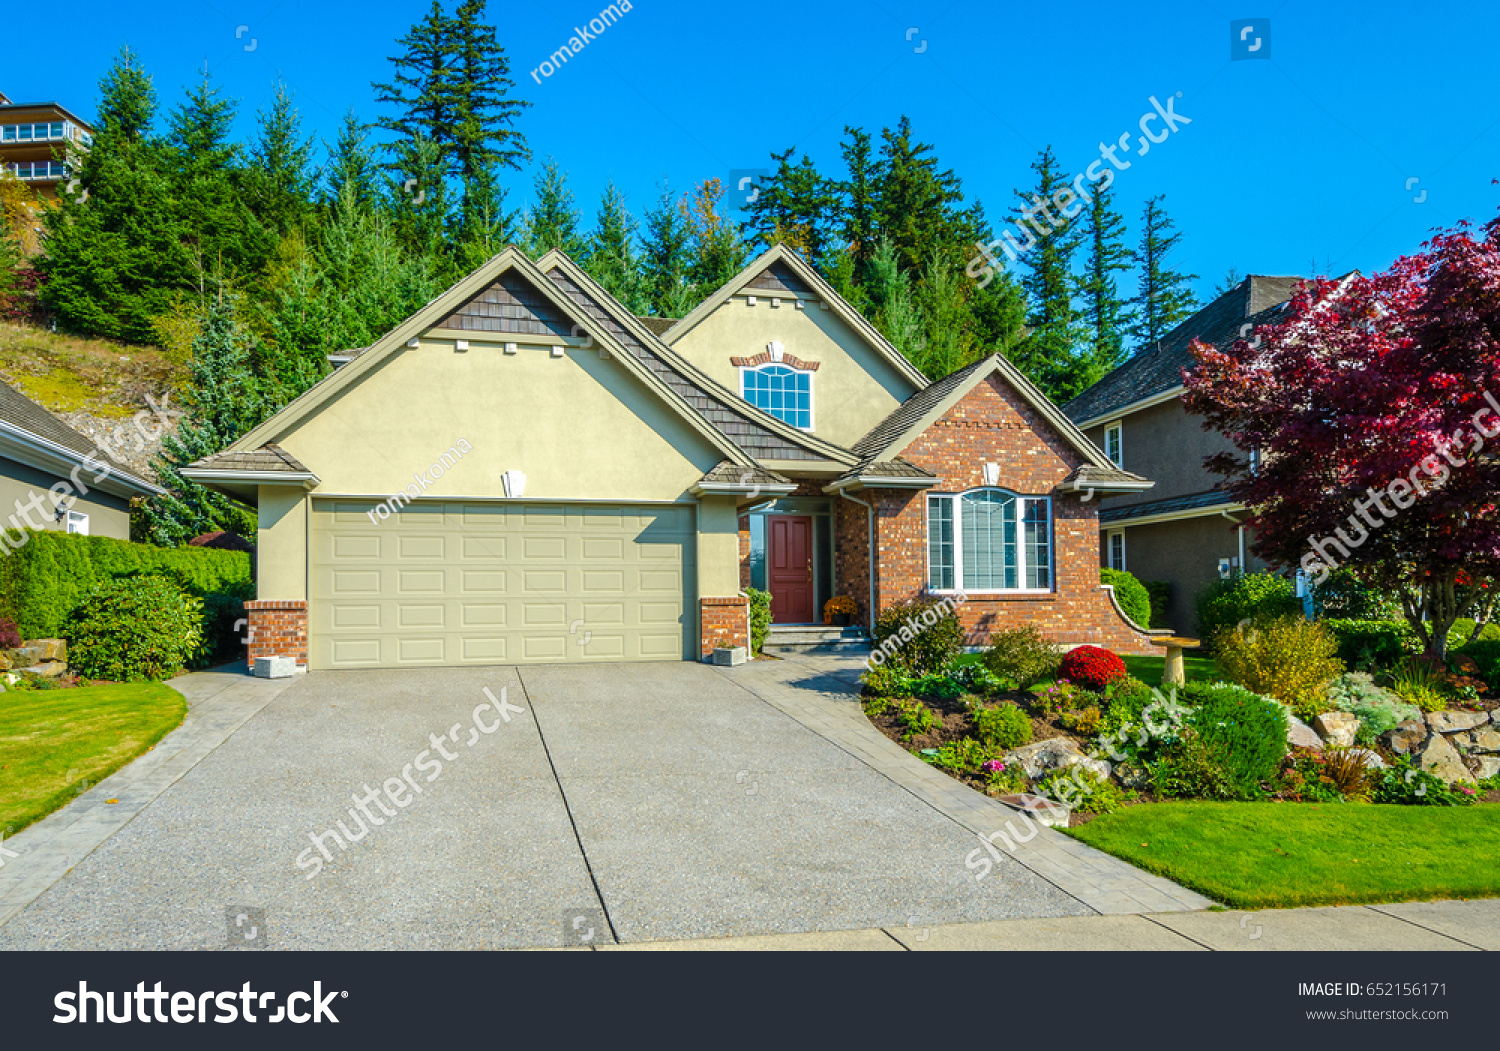 Big custom made luxury house with nicely landscaped and trimmed front yard in the suburbs of Vancouver, Canada. #652156171